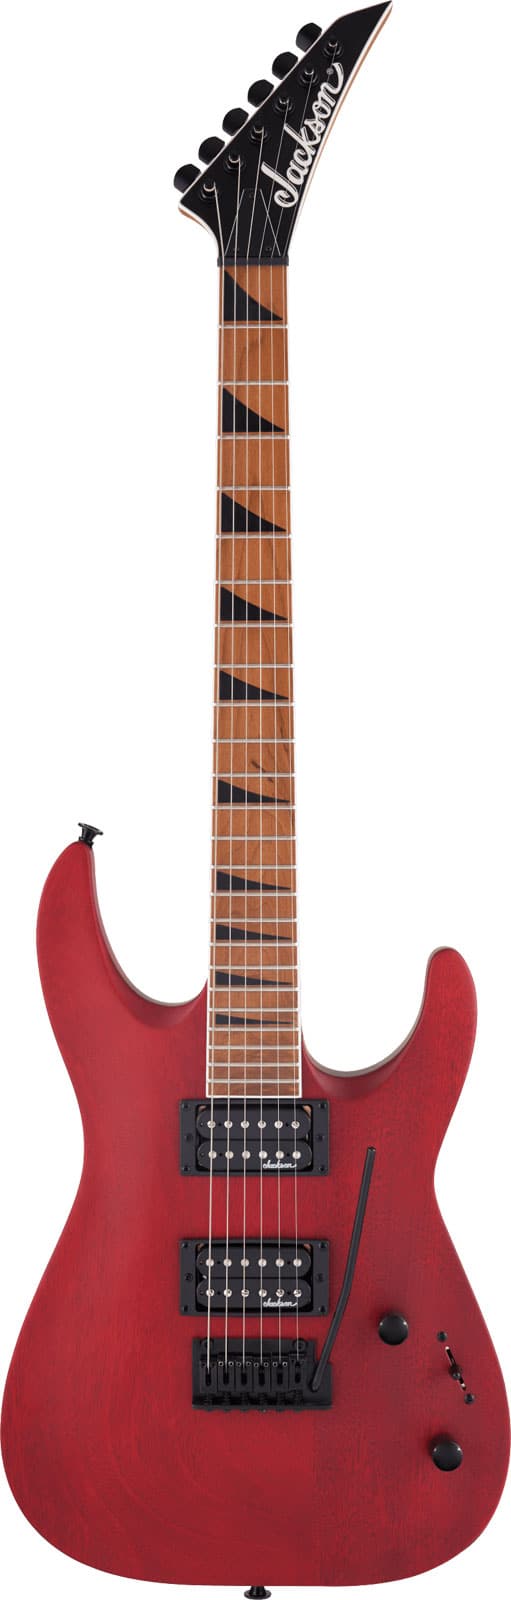 JACKSON GUITARS JS DINKY ARCH TOP JS24 DKAM MN, RED STAIN